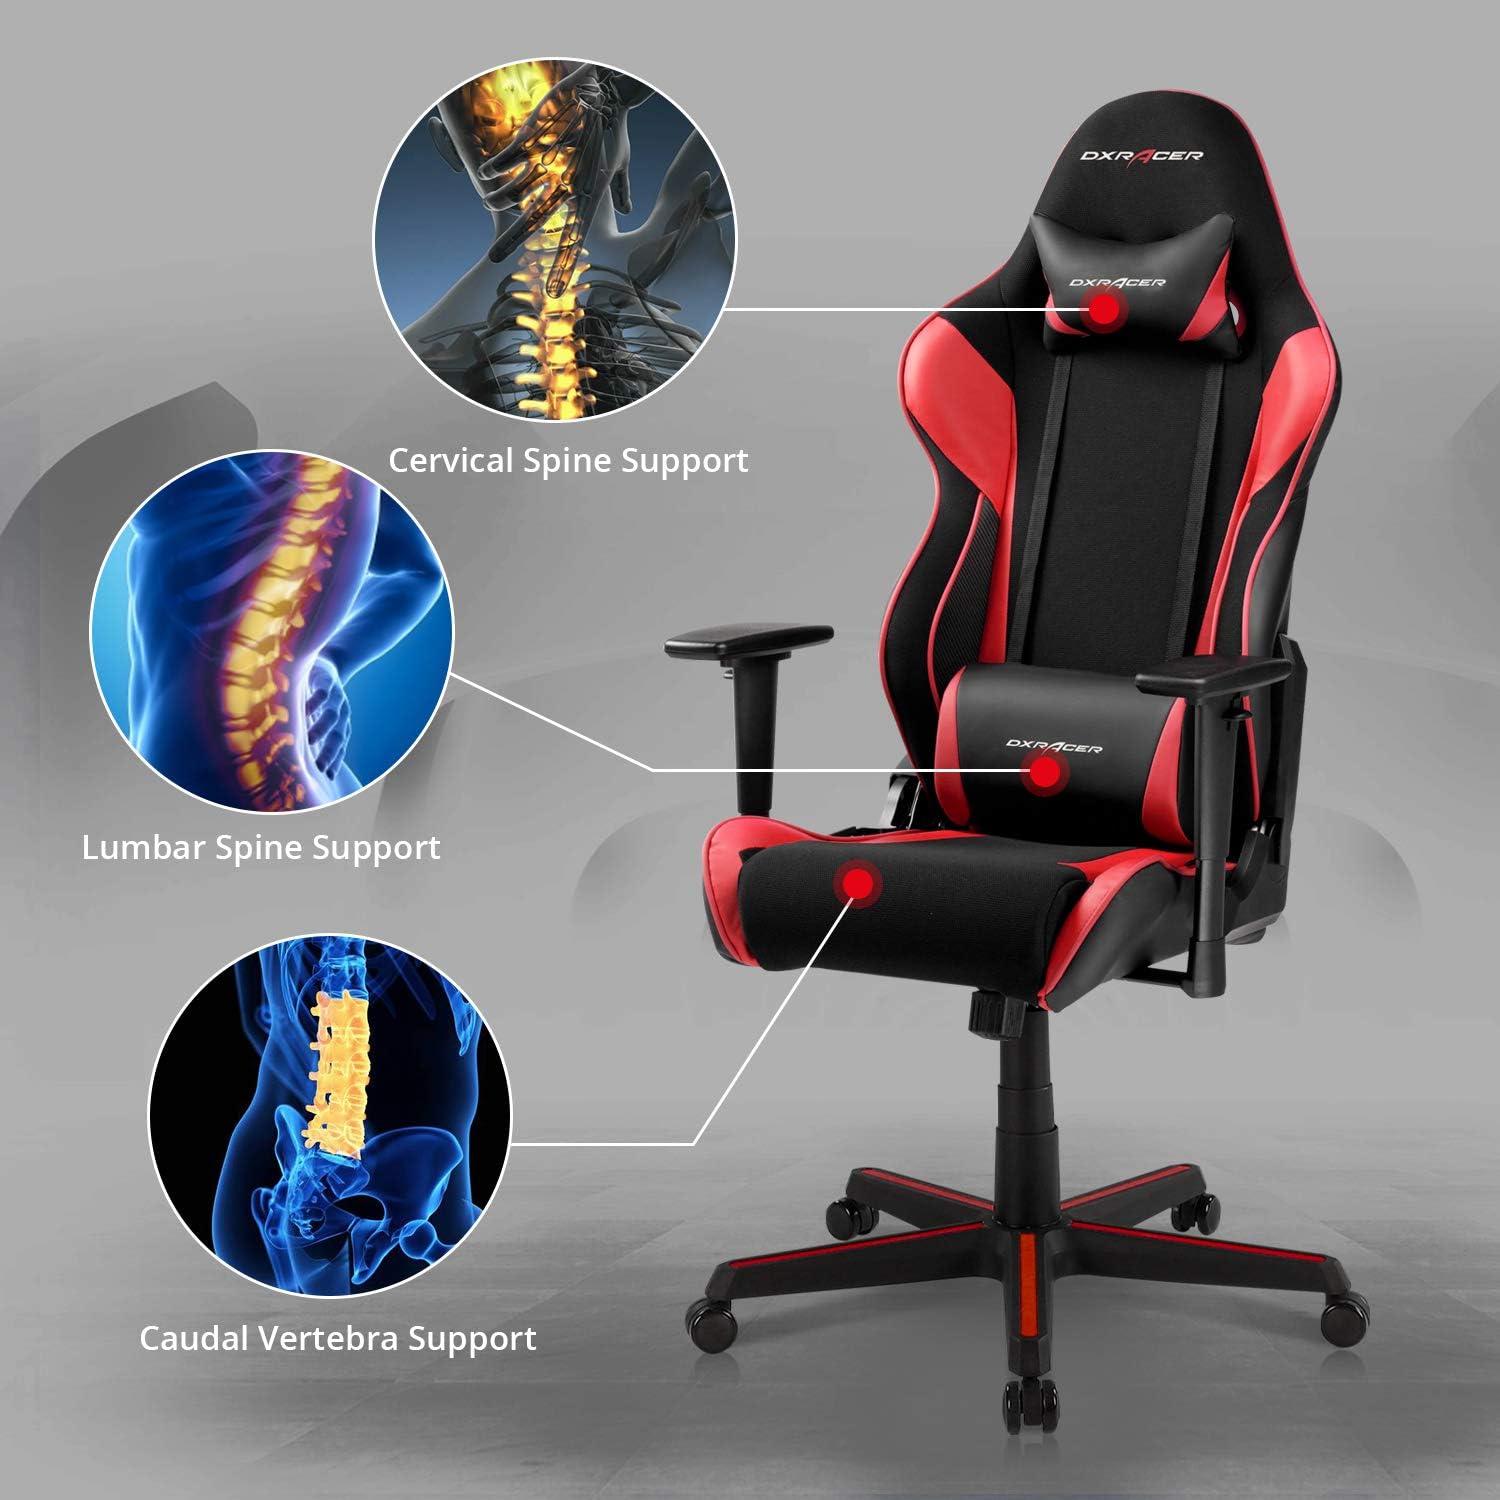 Adjustable armrests, tilt-rocking capability, and reclining backrest - Customize your seating experience. 0810027590176